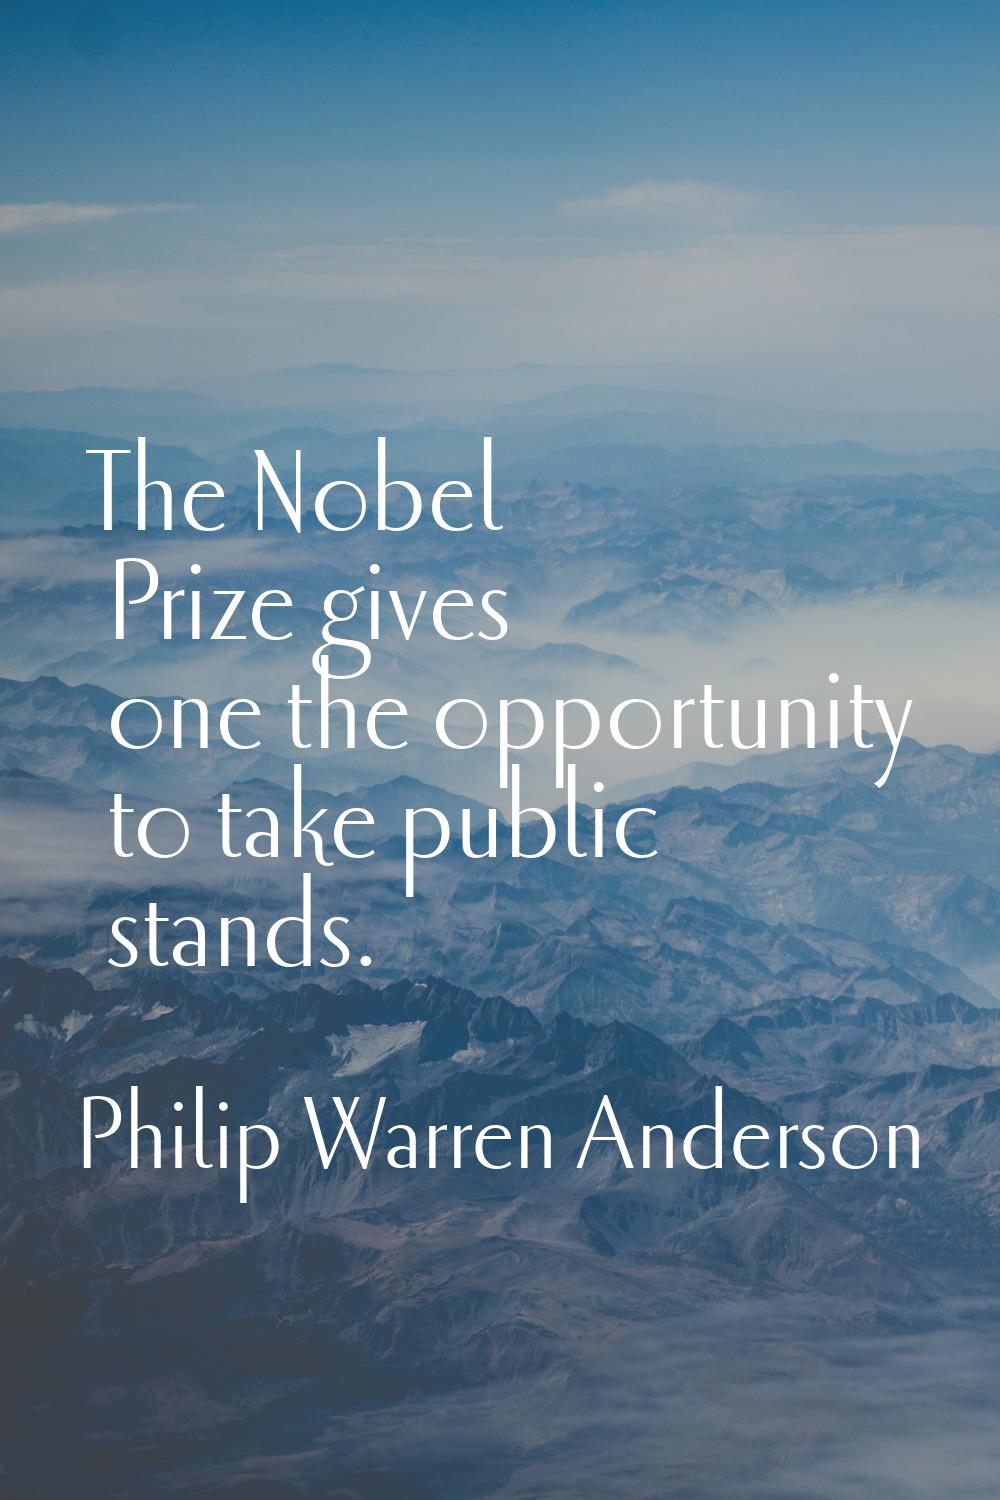 The Nobel Prize gives one the opportunity to take public stands.